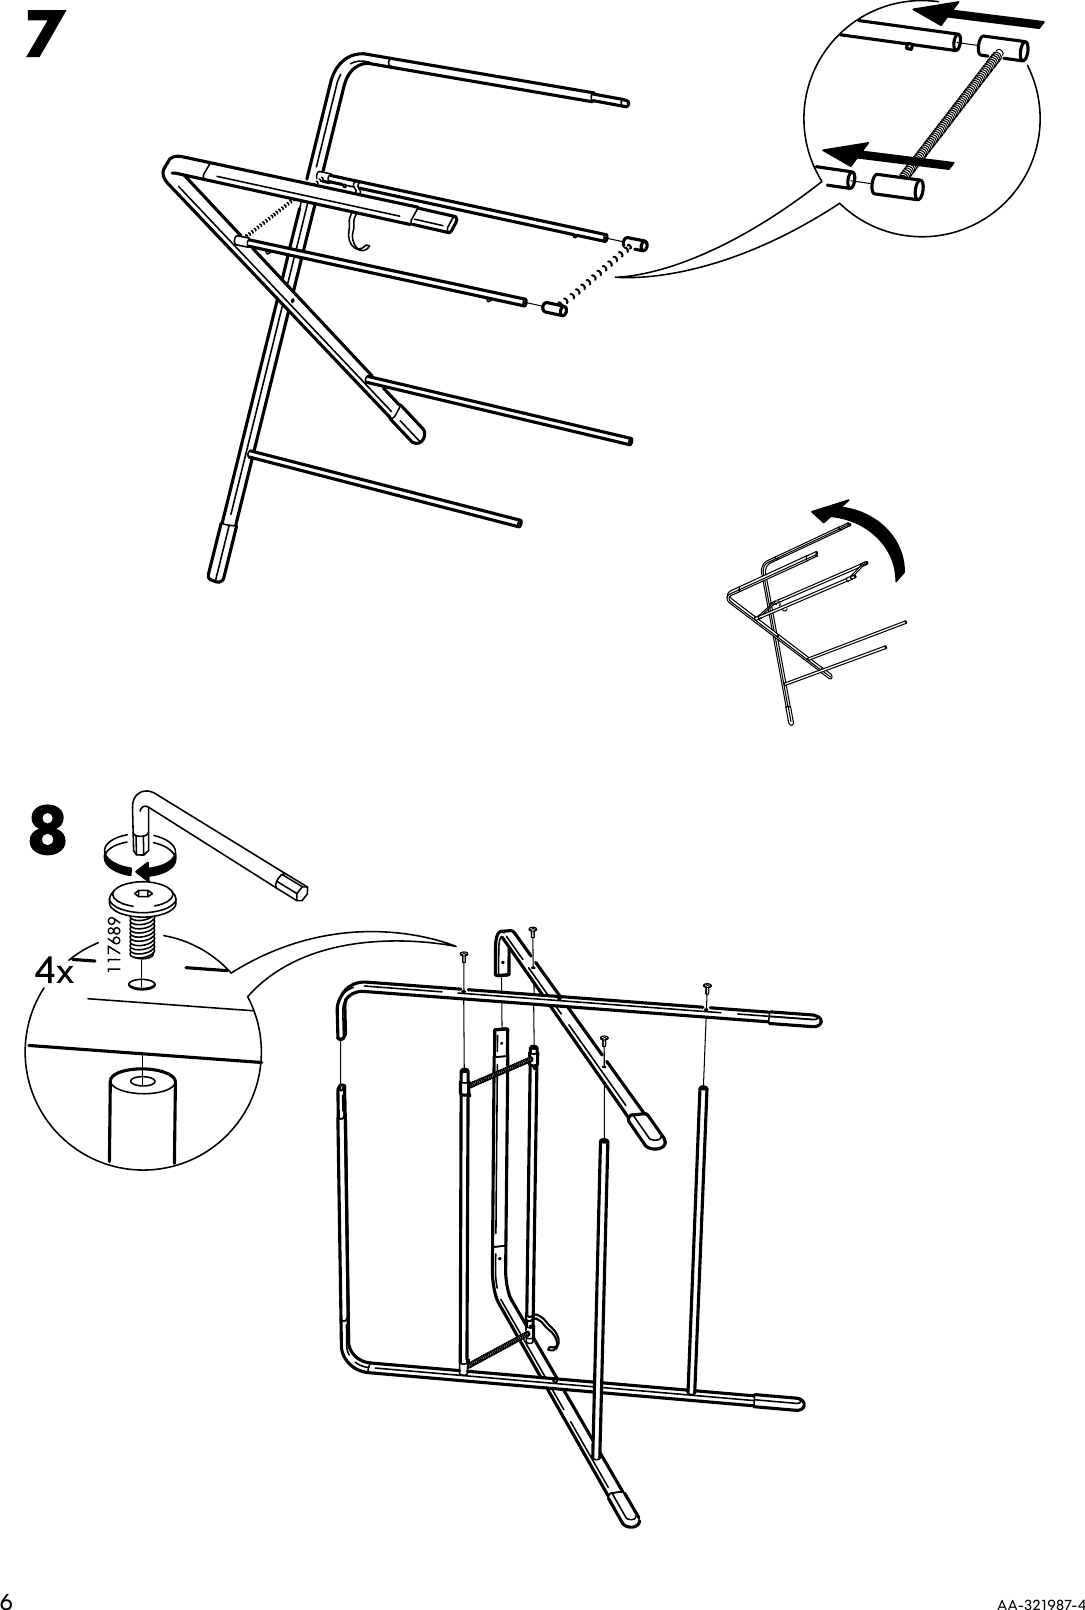 Page 6 of 12 - Ikea Ikea-Spoling-Changing-Table-Assembly-Instruction